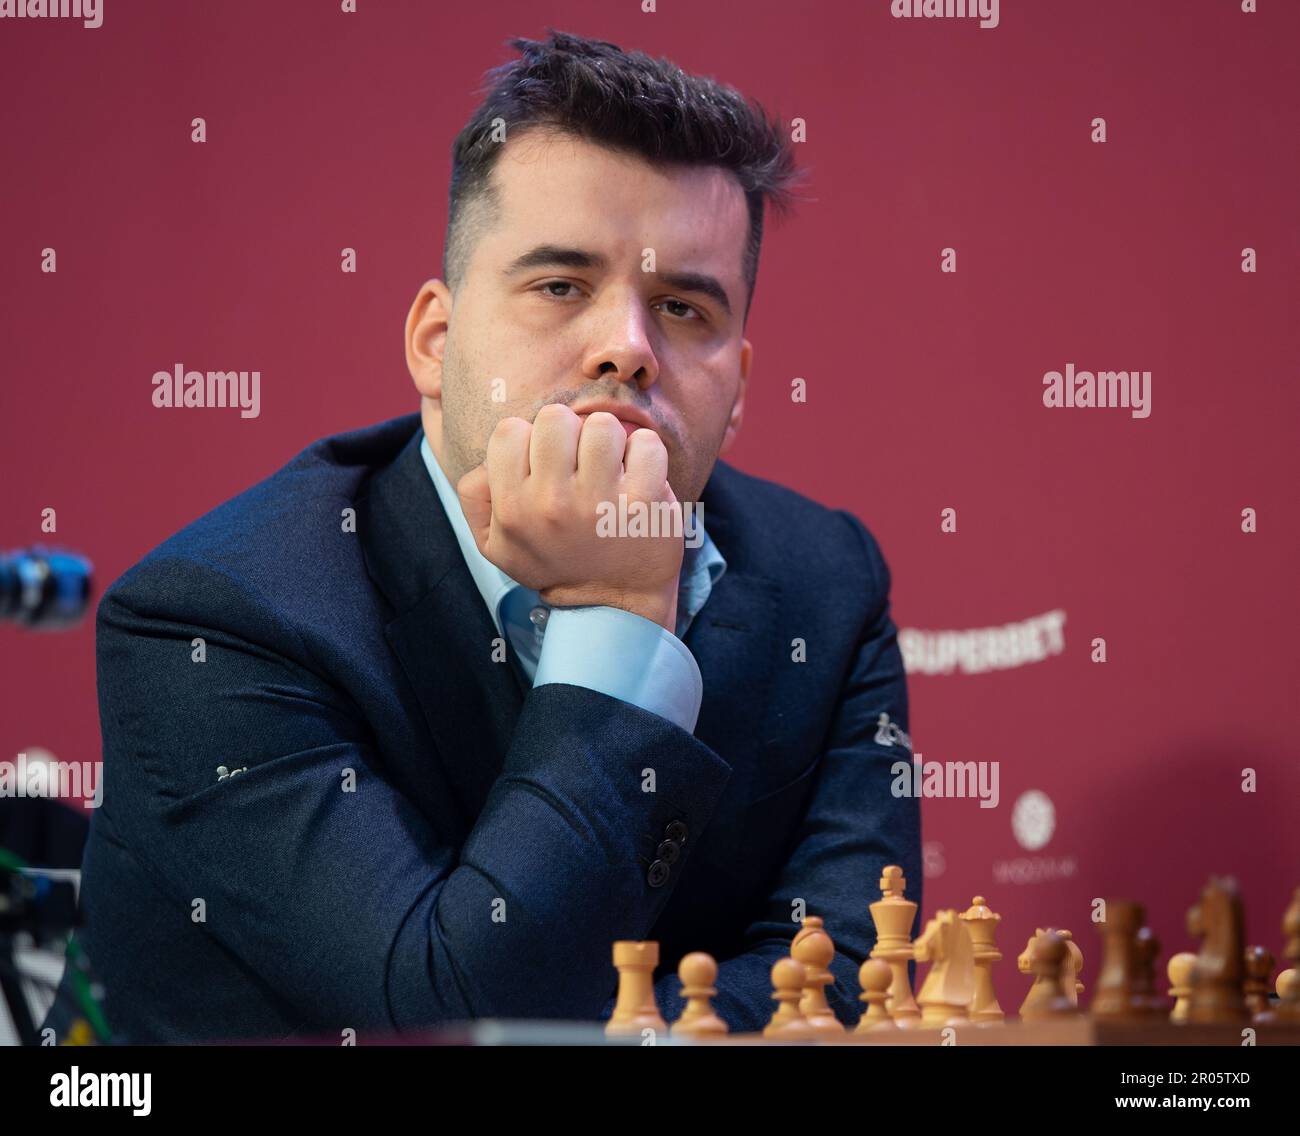 Bucharest, Romania. 10th May, 2023: Romanian chess grandmaster Richard  Rapport attends a press conference, in the free day of Superbet Chess  Classic Romania 2023, the first stage of the Grand Chess Tour